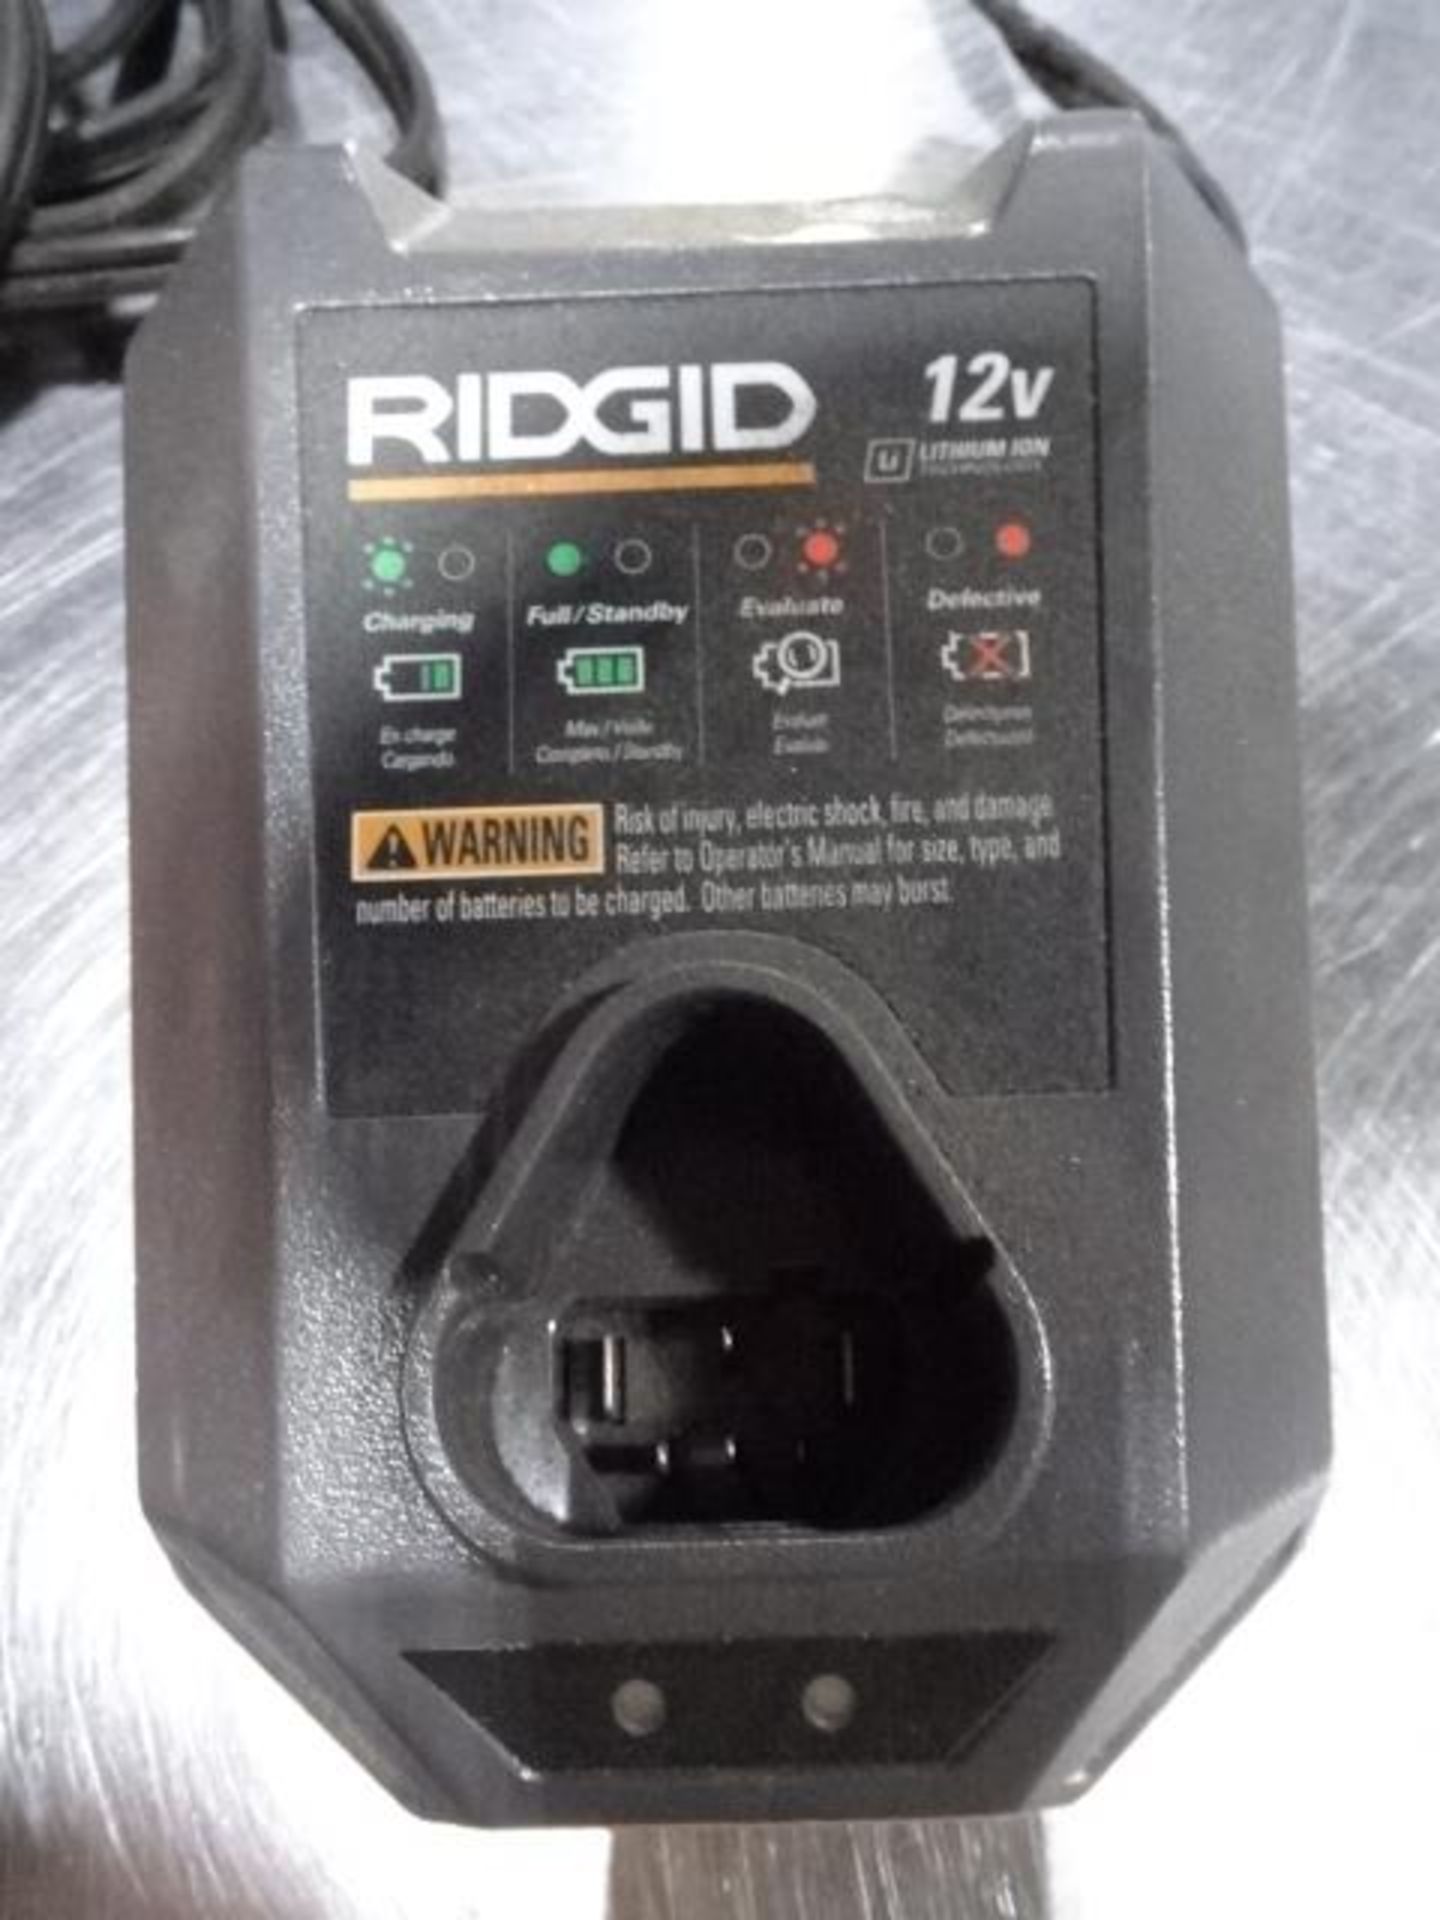 Ridgid Batters Chargers and Batteries - Image 3 of 3